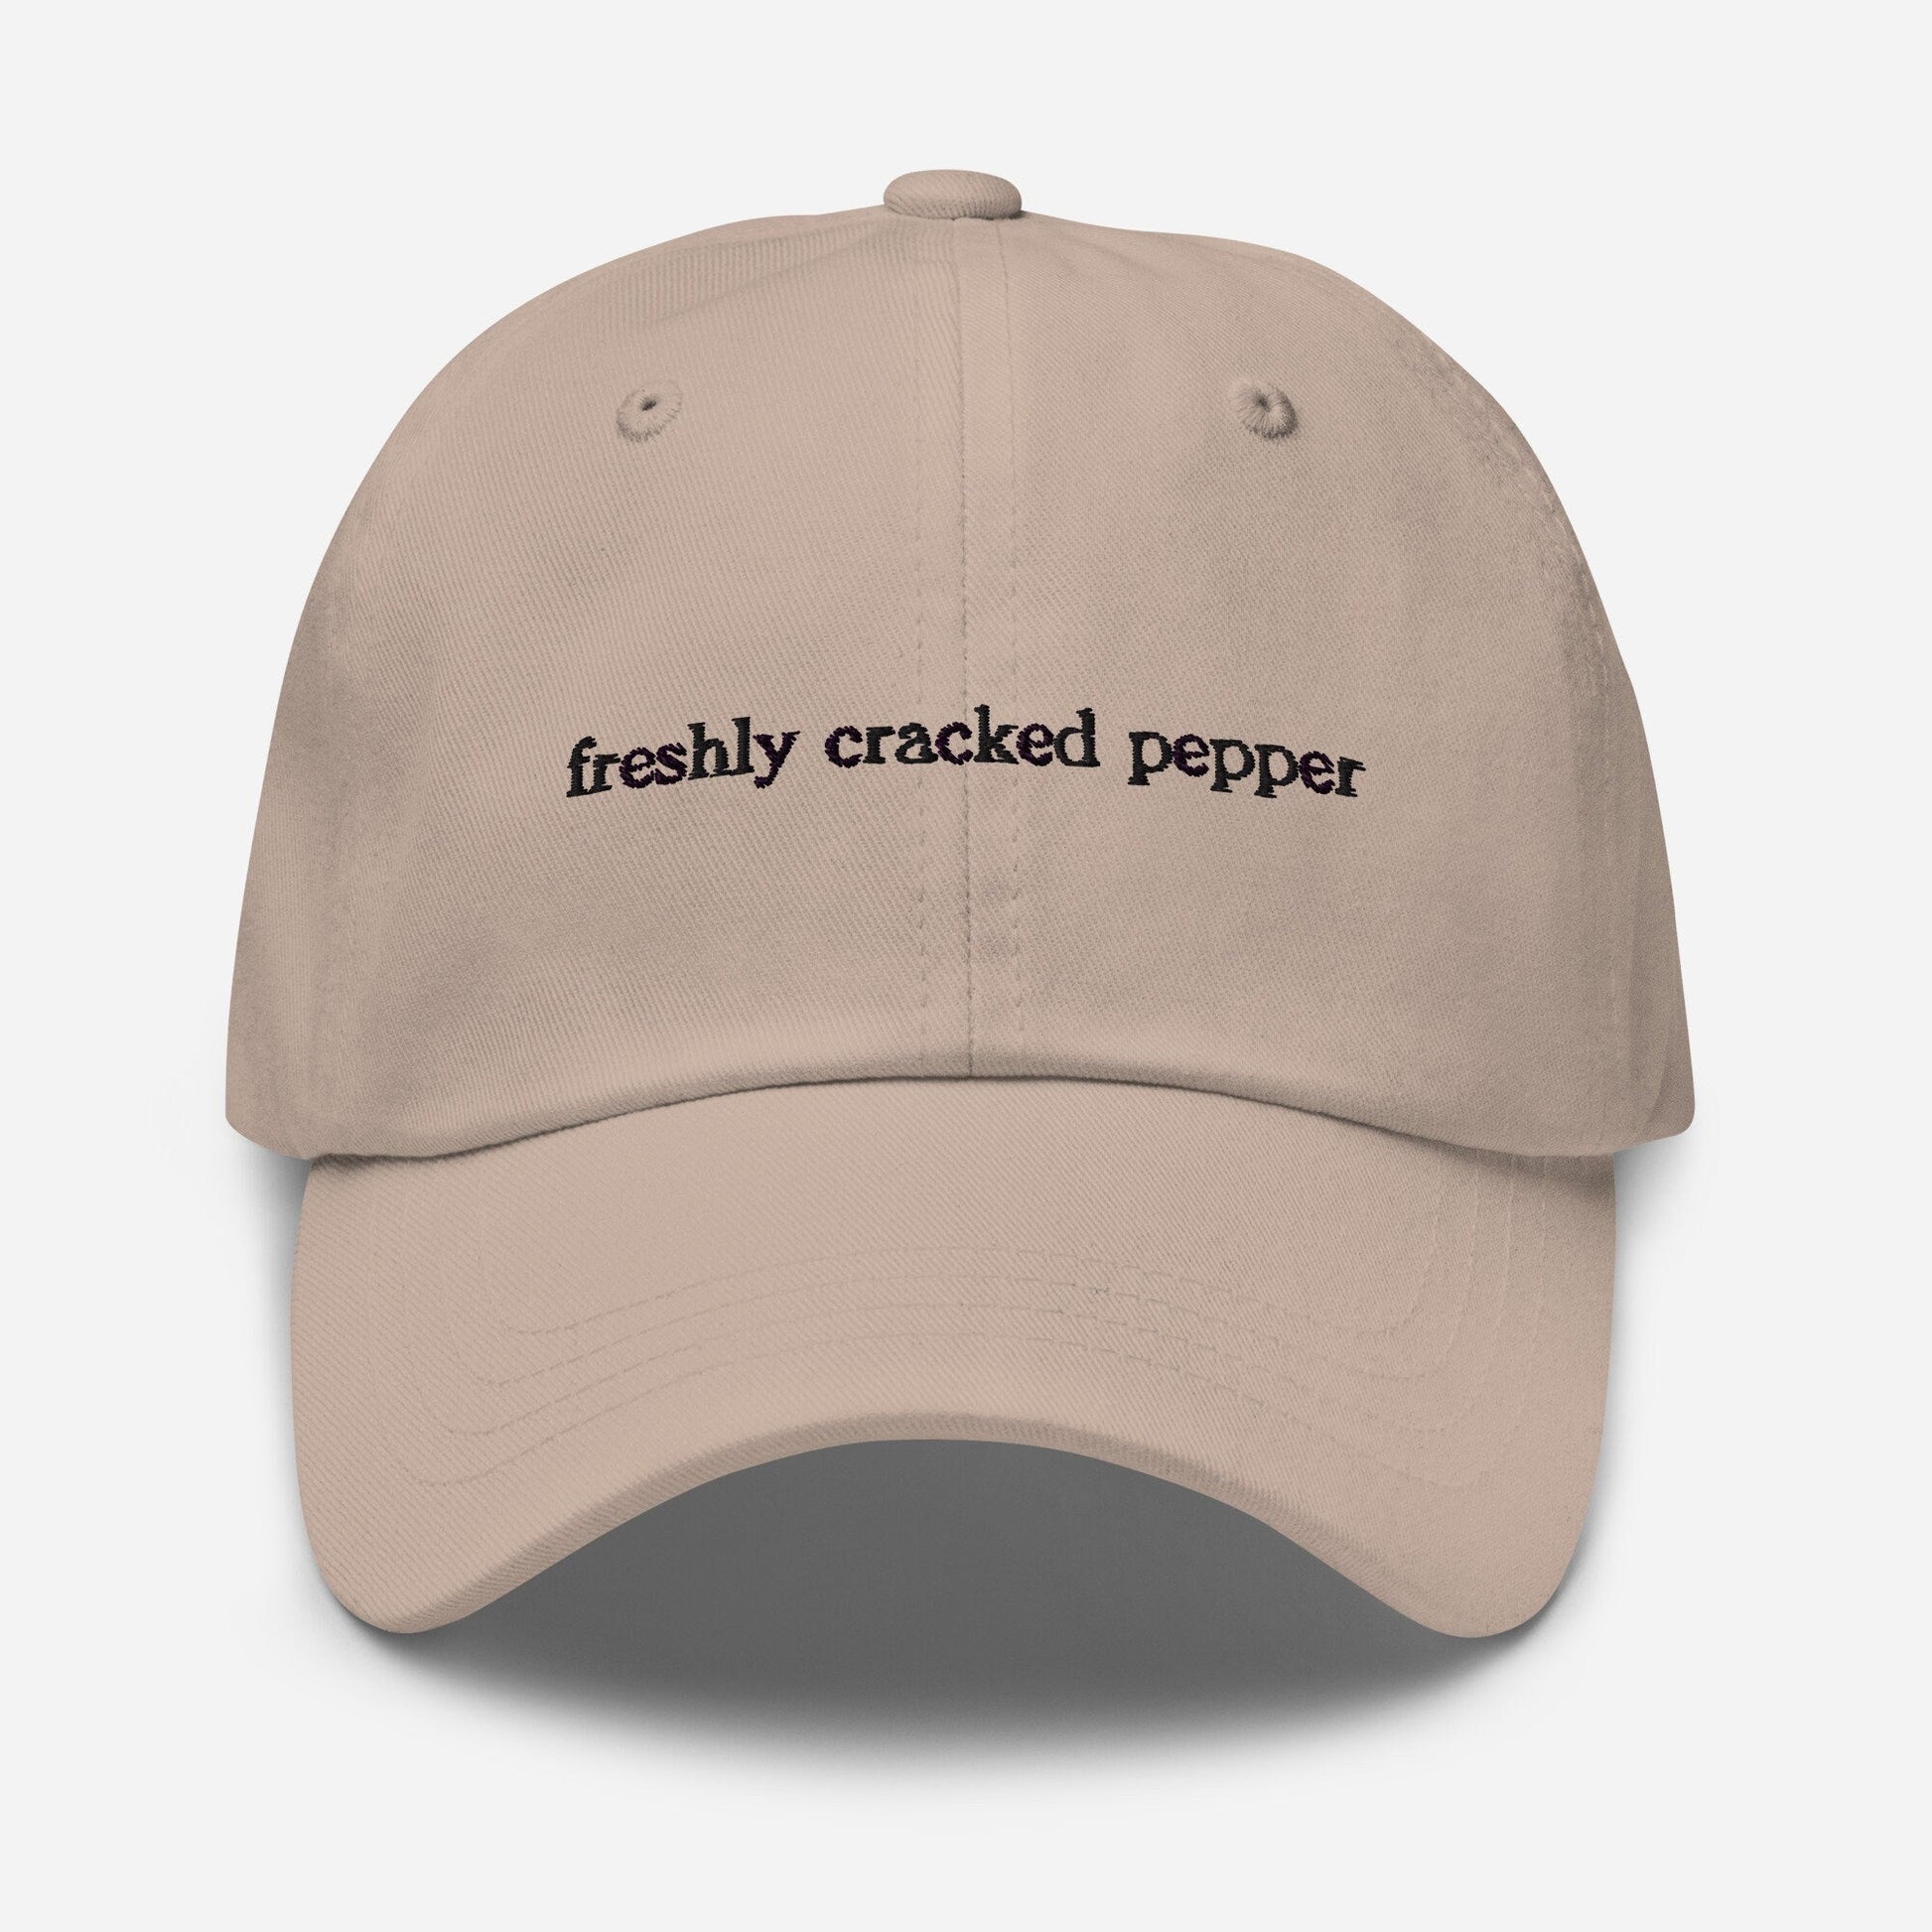 Cracked Pepper Dad Hat - Gift for Home Chef Food Fans - Embroidered Cotton Cap